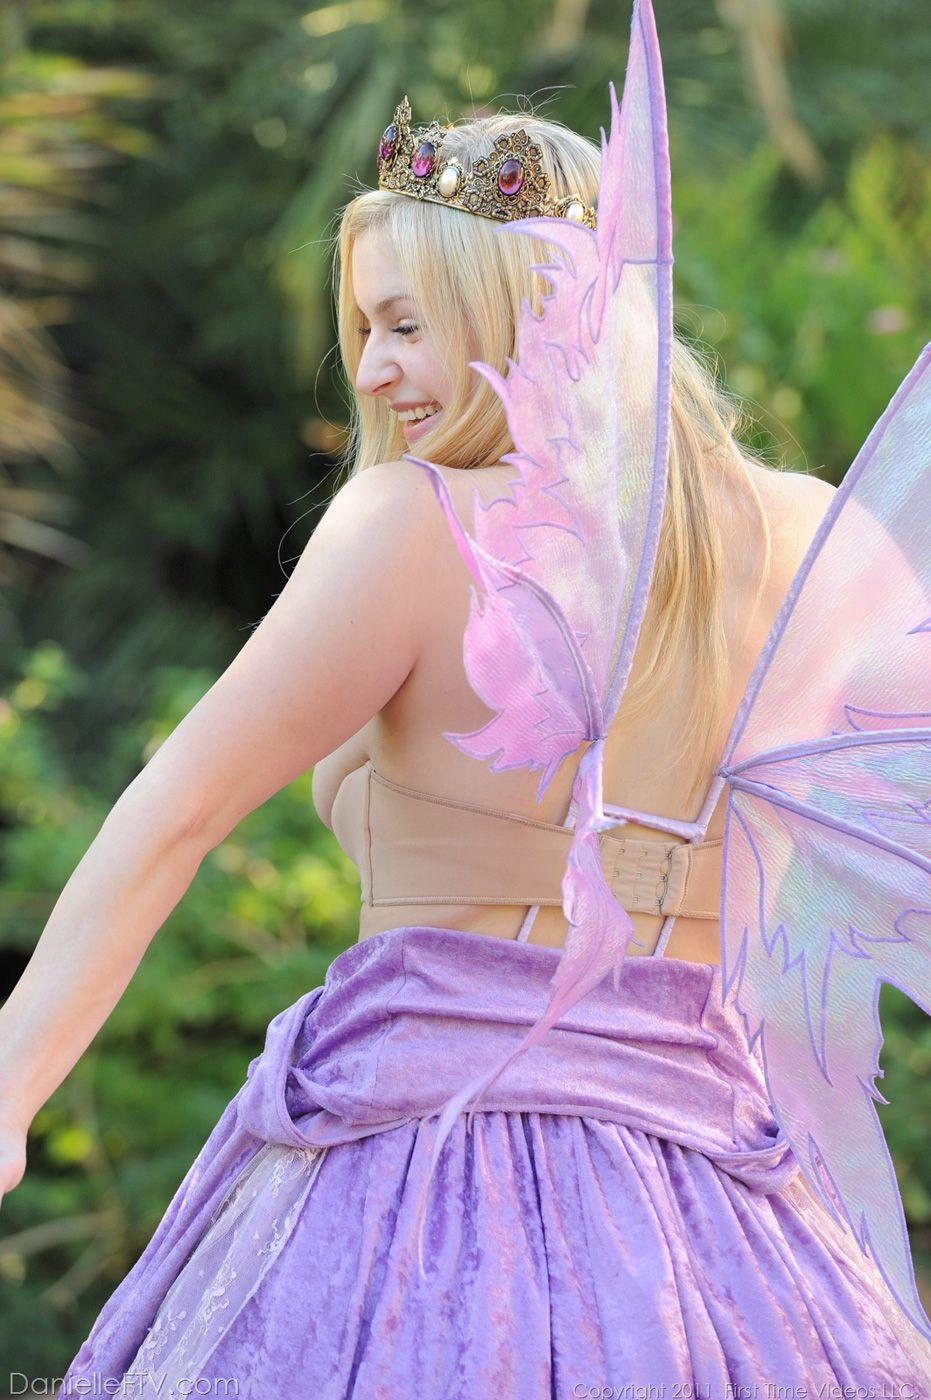 Pictures of Danielle FTV dressed as your fantasy fairy #53971259